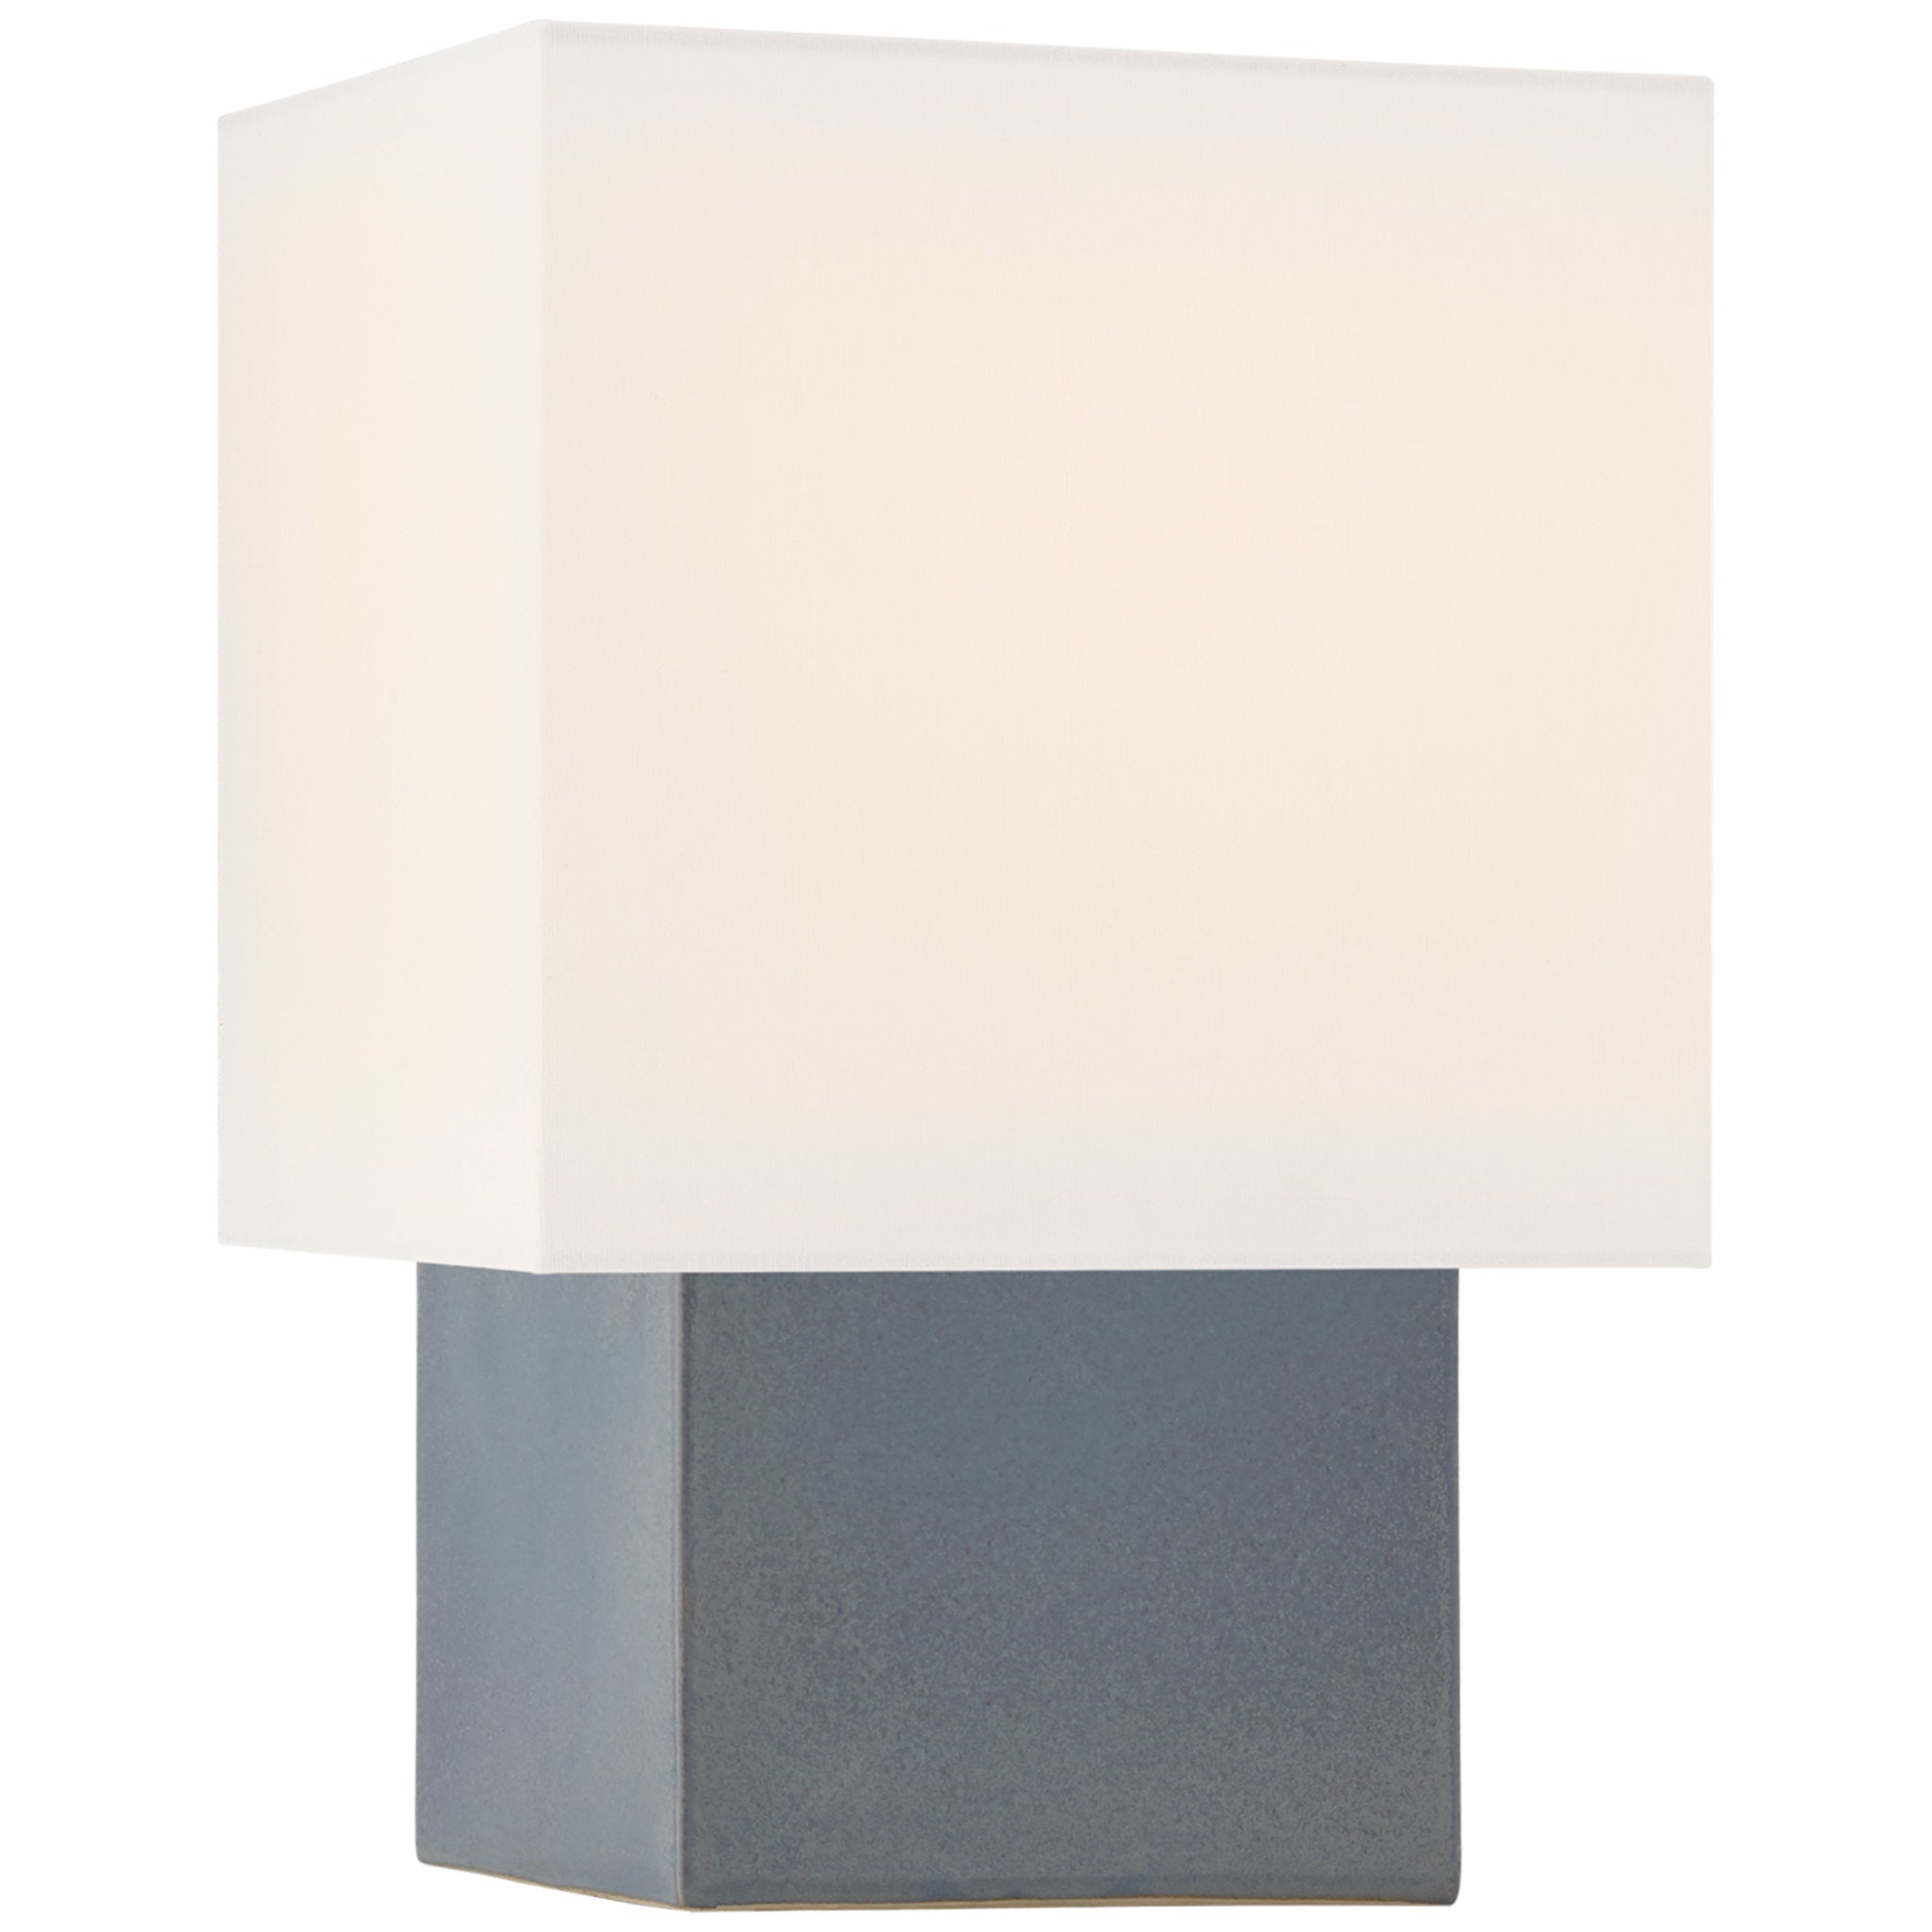 Kelly Wearstler Pari Small Square Table Lamp in Cloudy Blue with Linen Shade